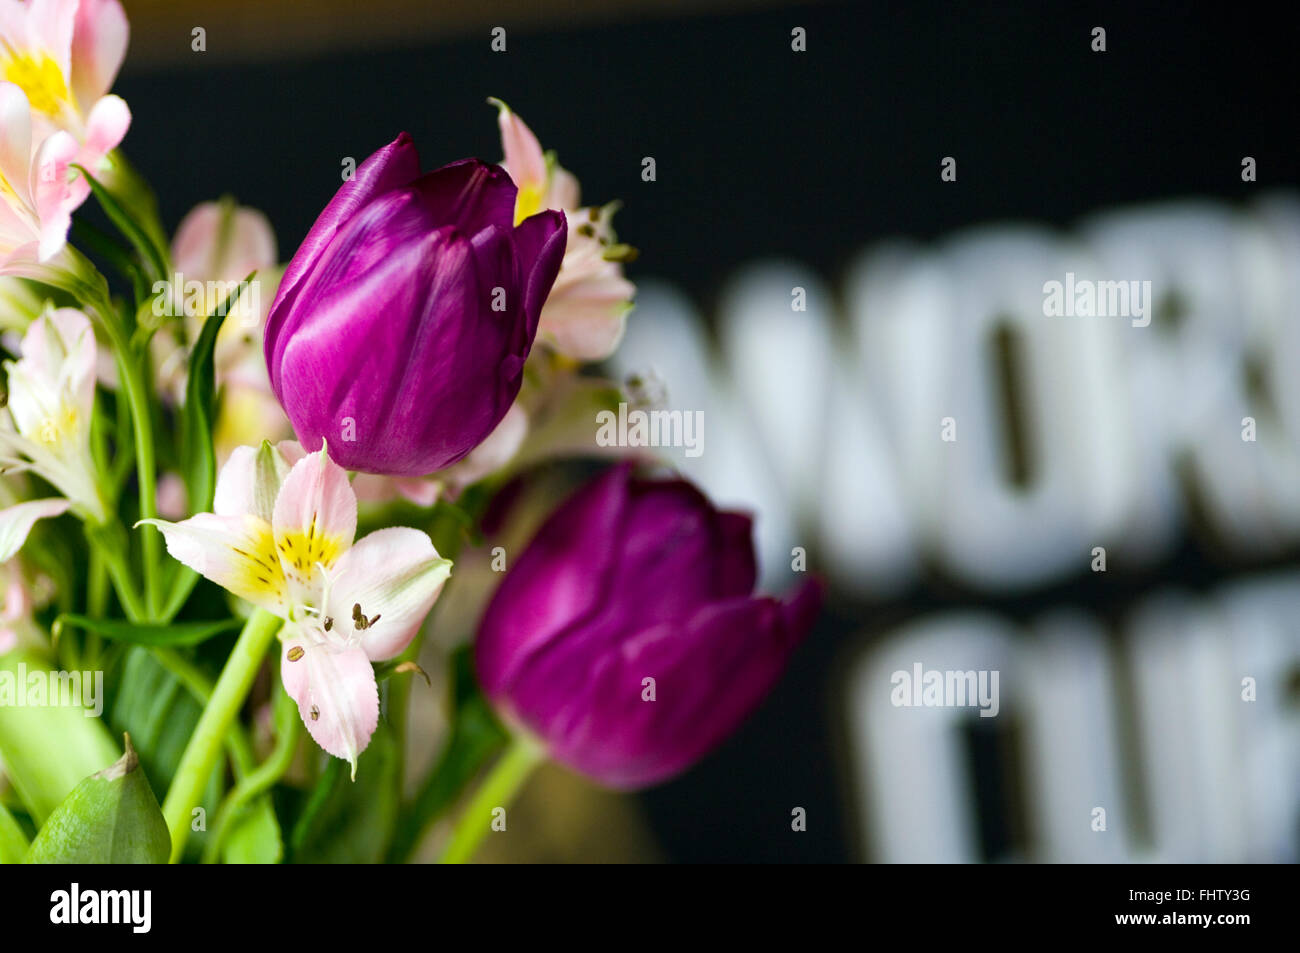 Vivid tulips and other flowers in front of a blurry sign Stock Photo